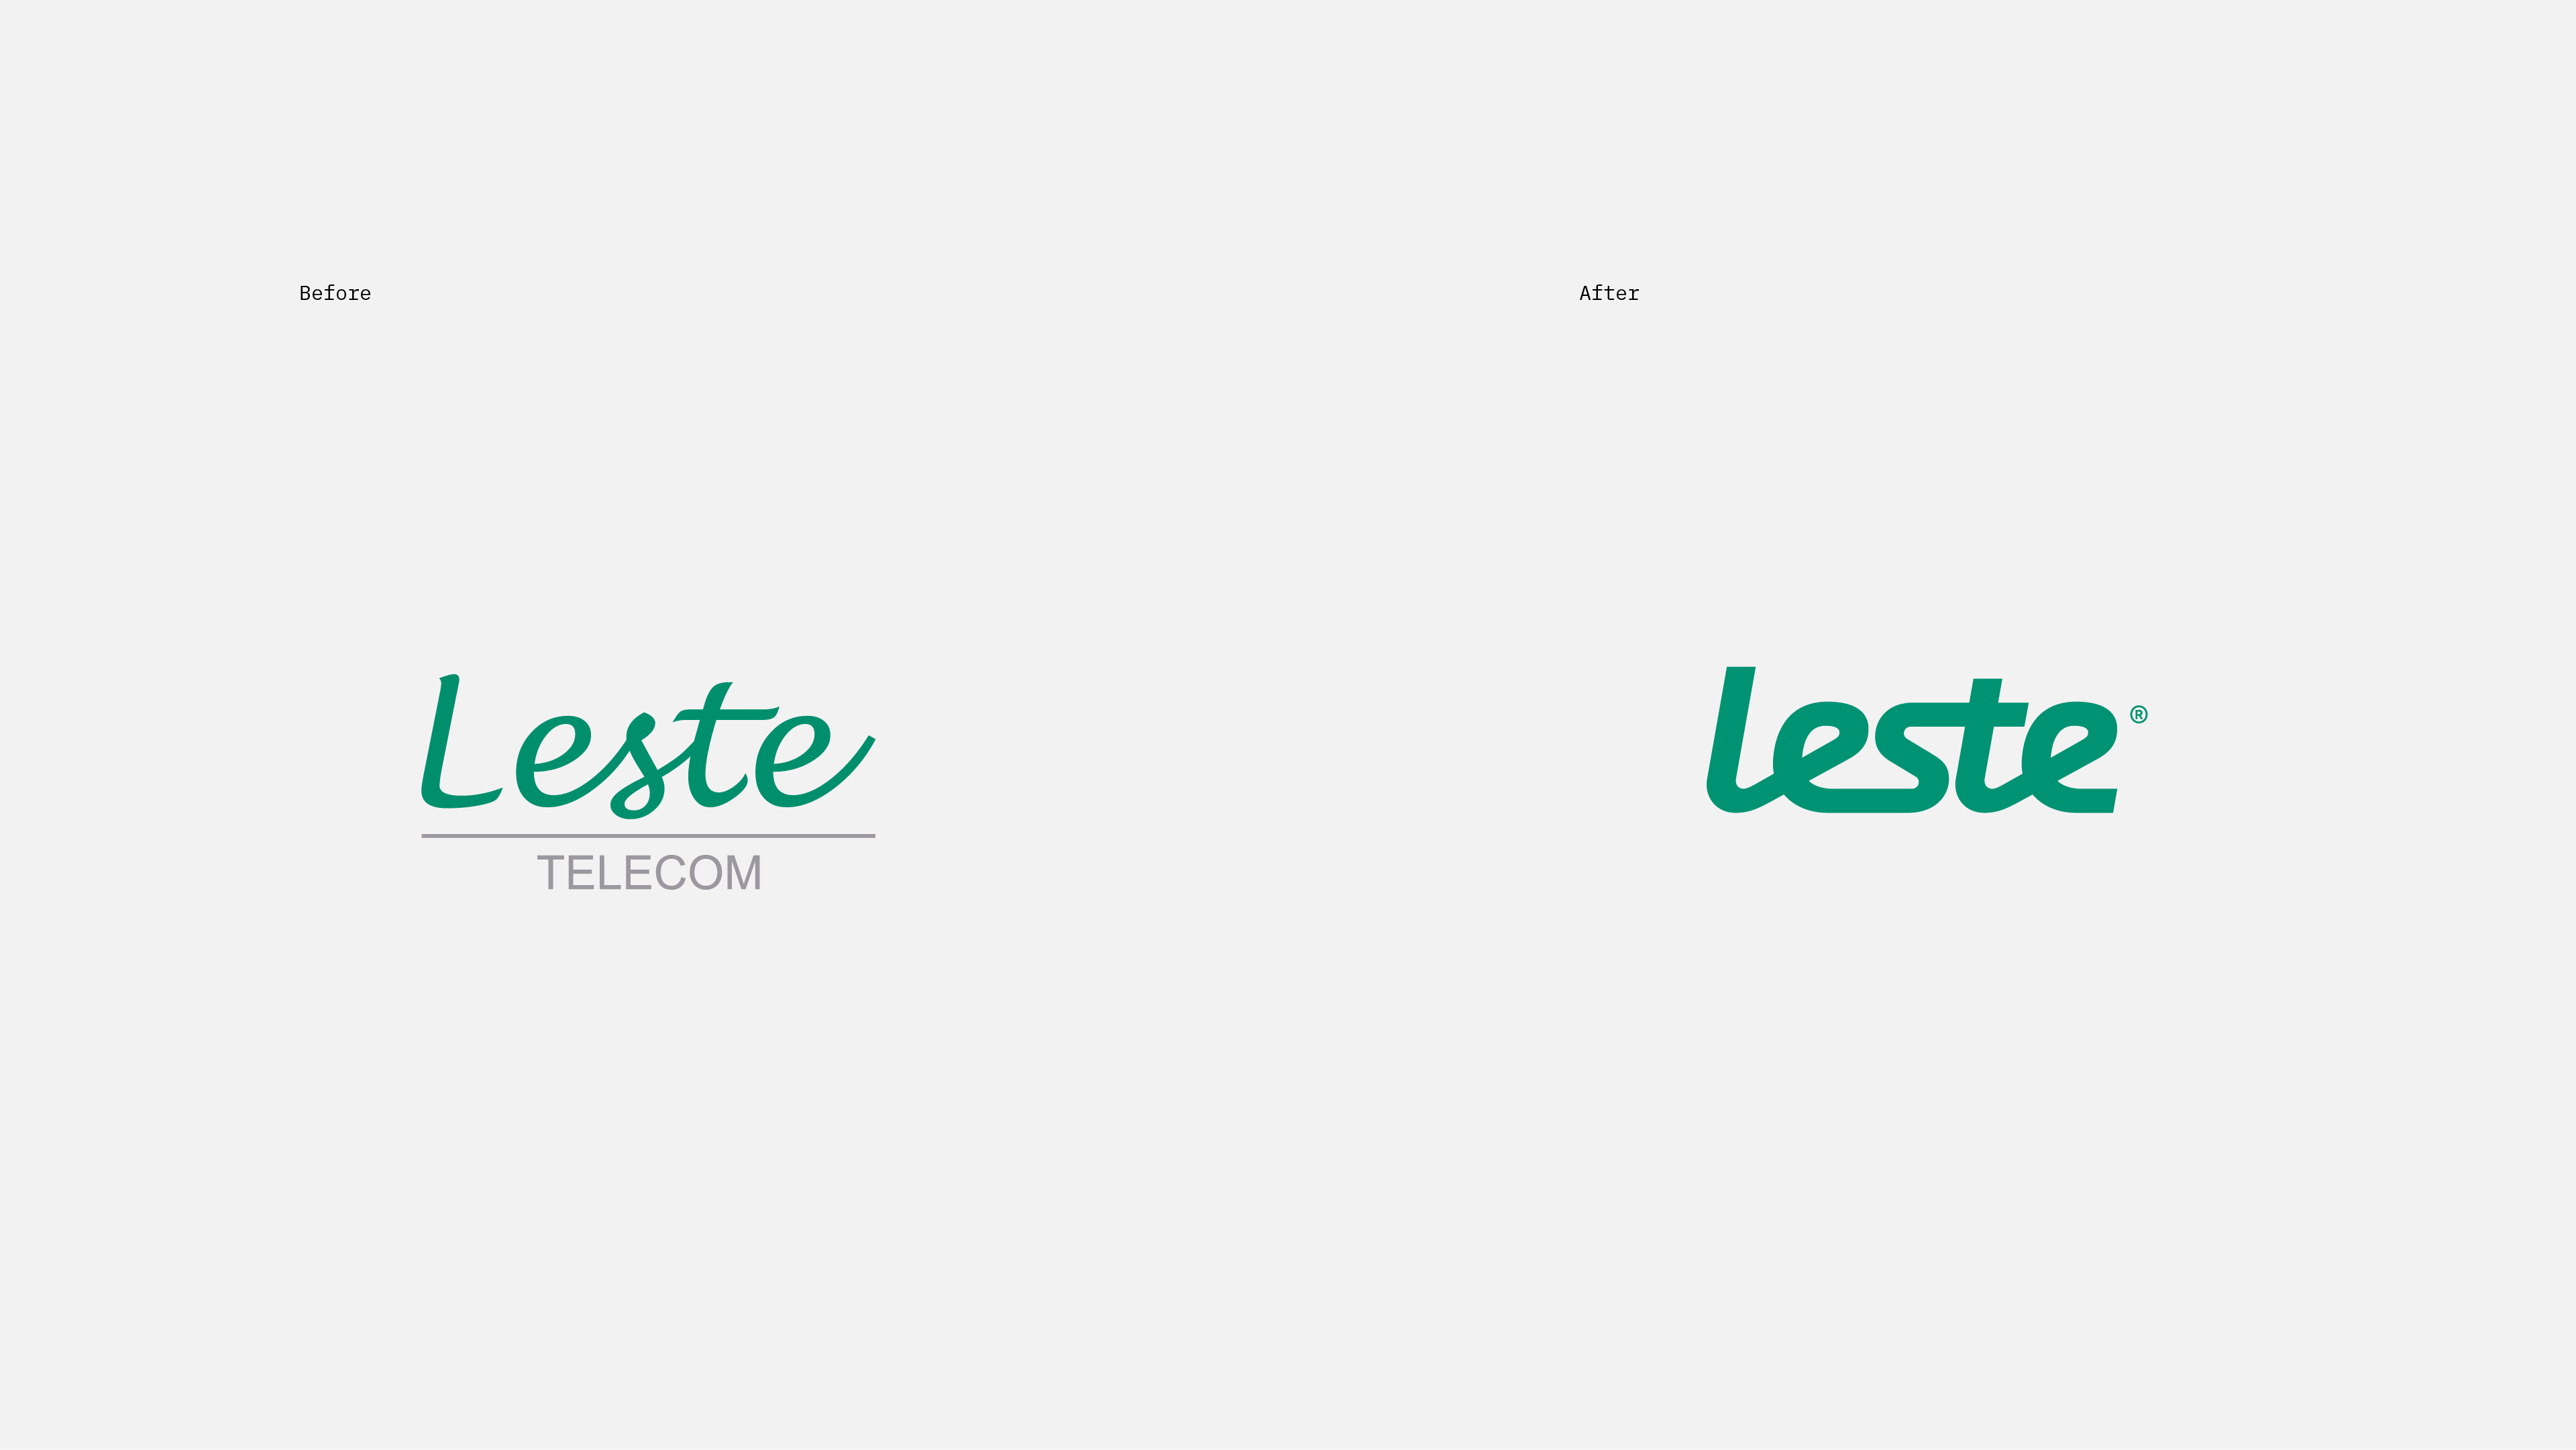 Leste_Before_After@2x